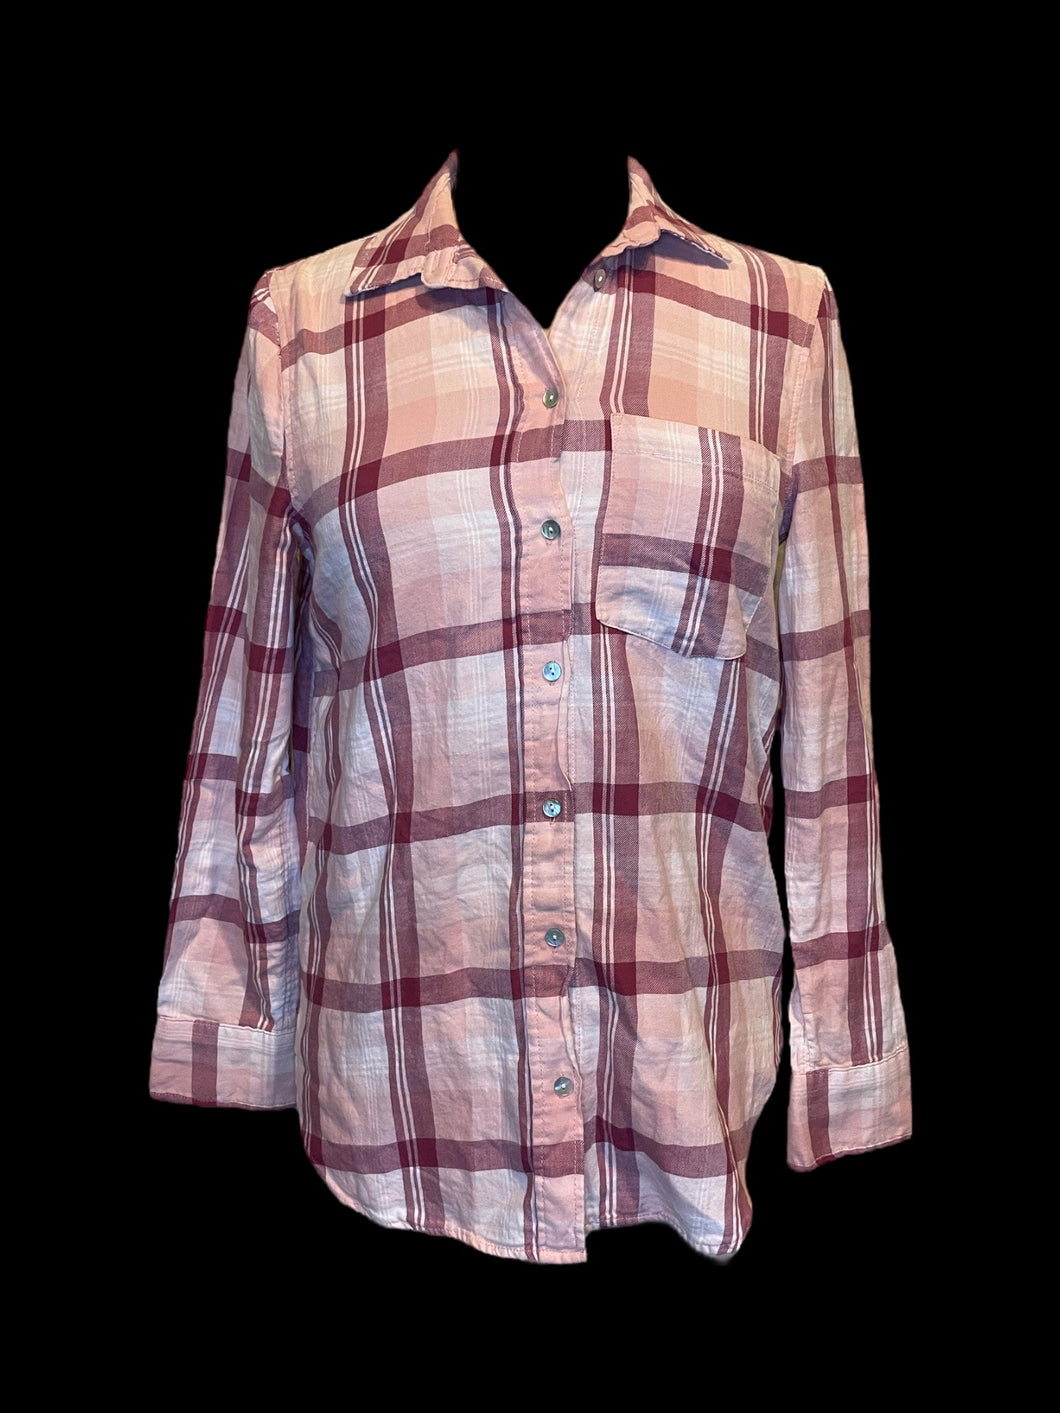 L Light pink, dark pink, & white plaid cotton long sleeve button down top w/ folded collar, chest pocket, & button cuffs